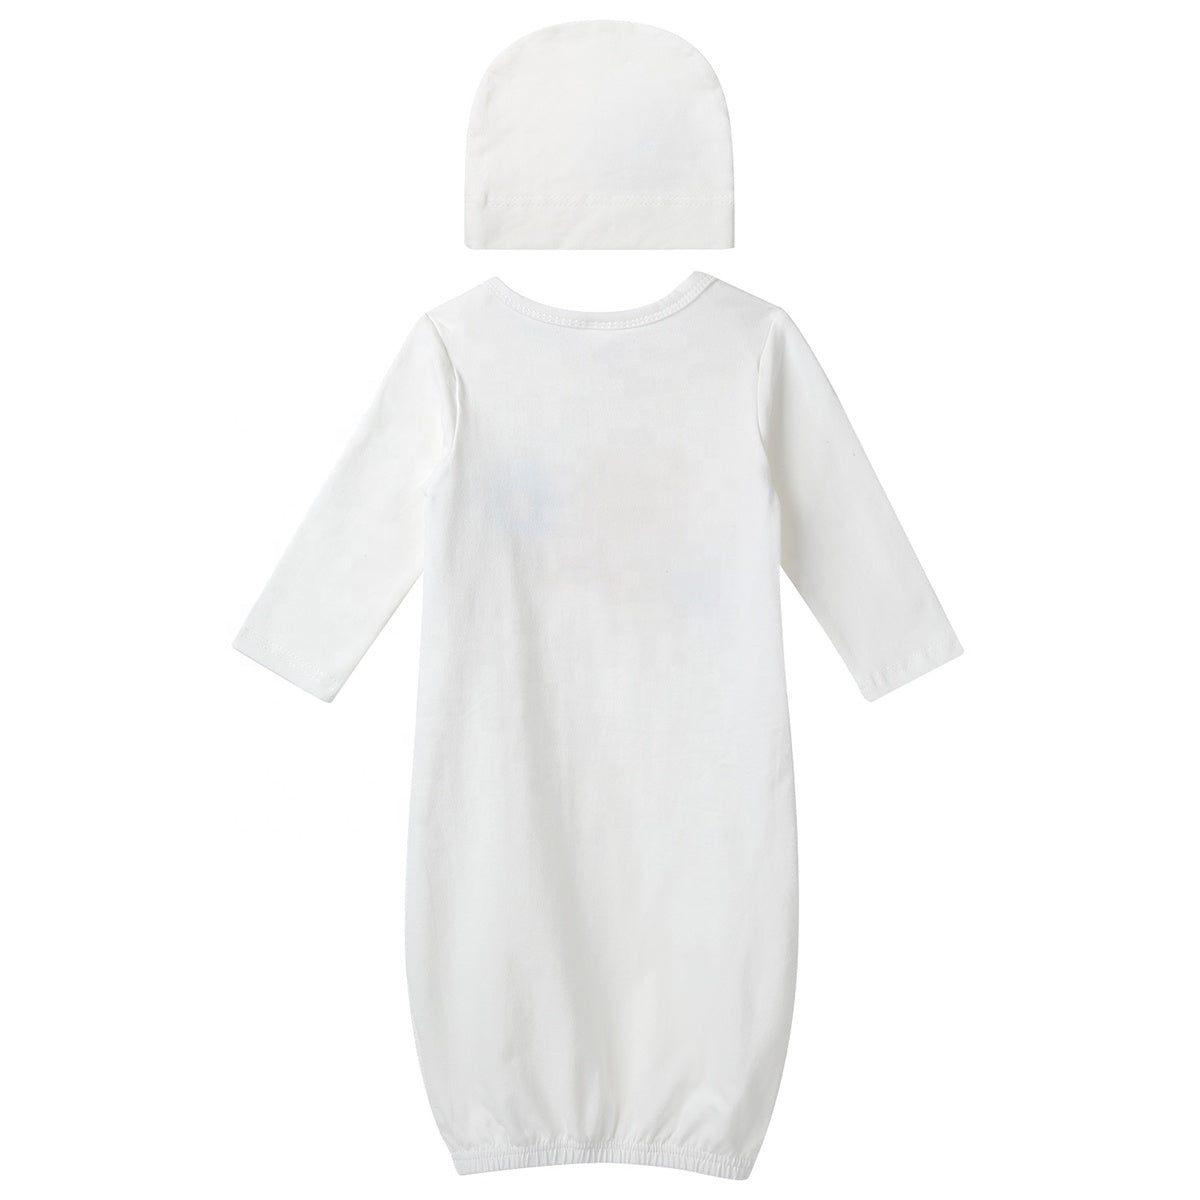 Newborn Baby Sleeping Gown and Hat Sublimation Blank Set. 0-3 Months Size.